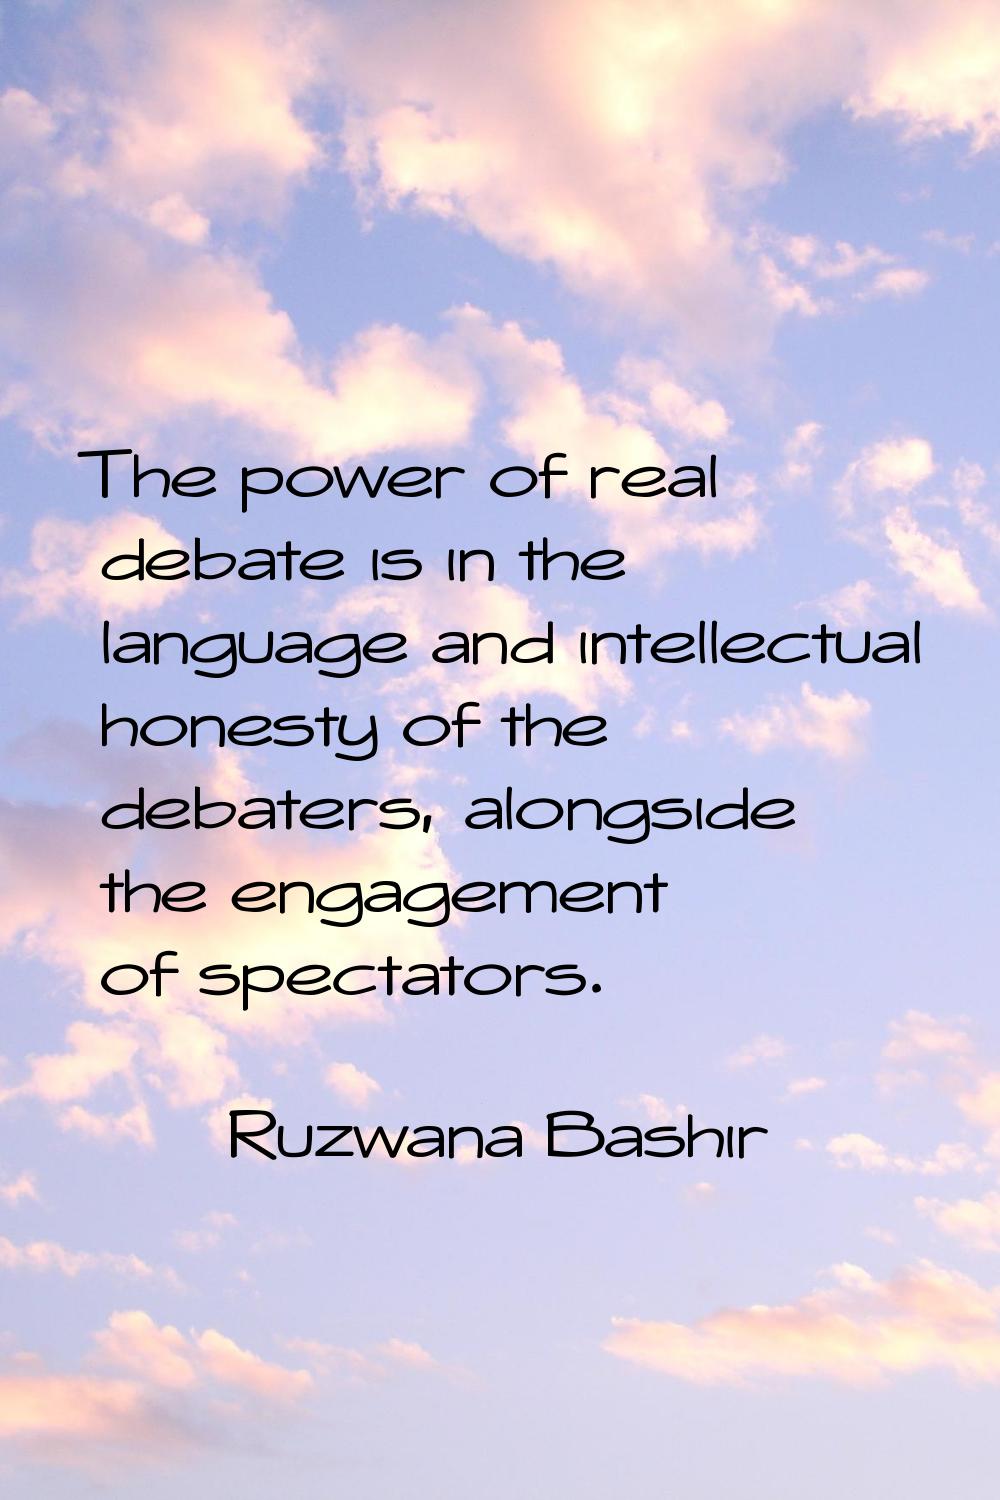 The power of real debate is in the language and intellectual honesty of the debaters, alongside the